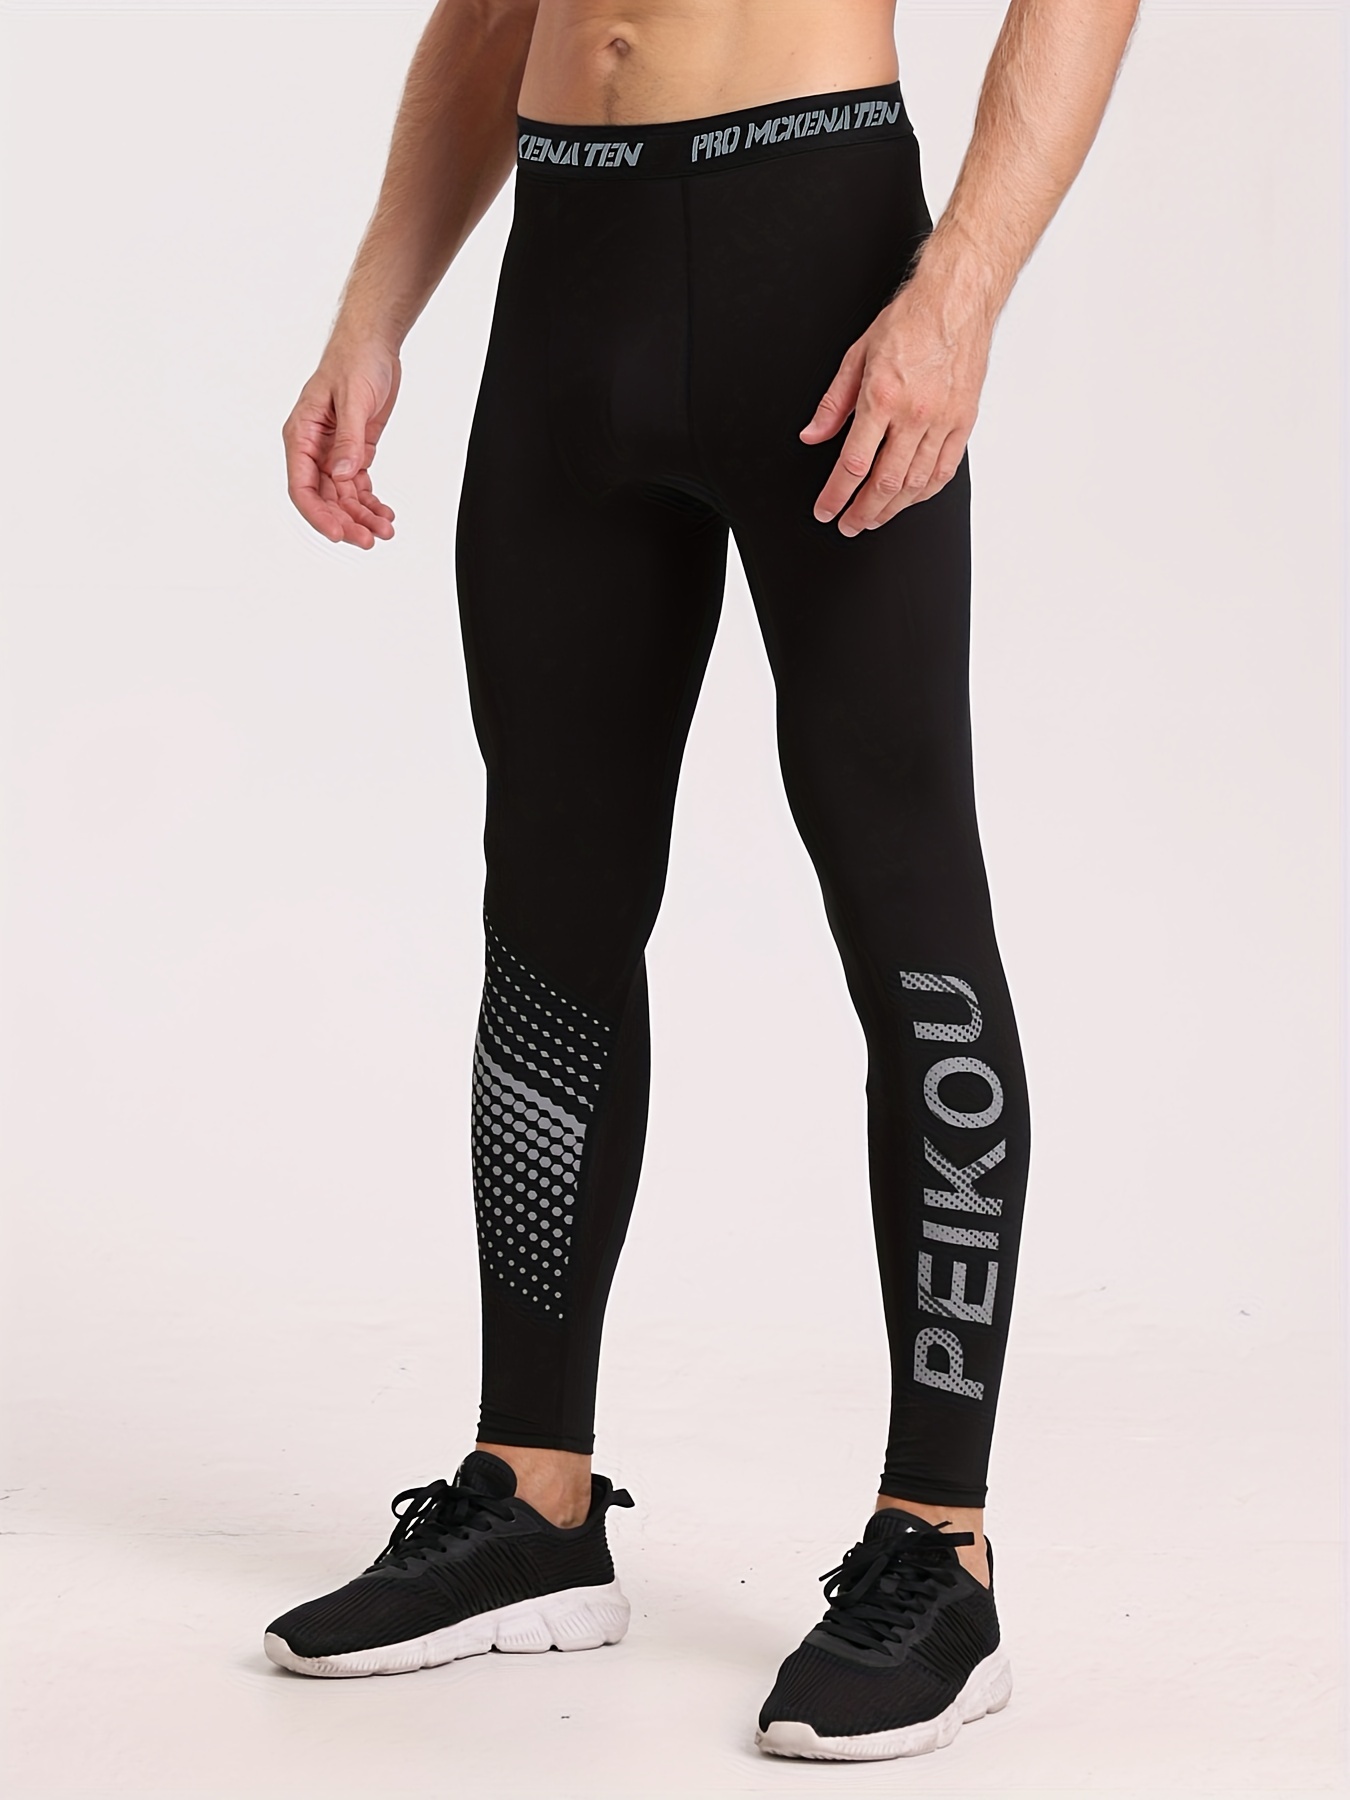 Mens One Leg Leggings, 3/4 Compression Pants, Base Layer Legging Tights  Wick Sweat Away Quickly for Outdoor Sports 